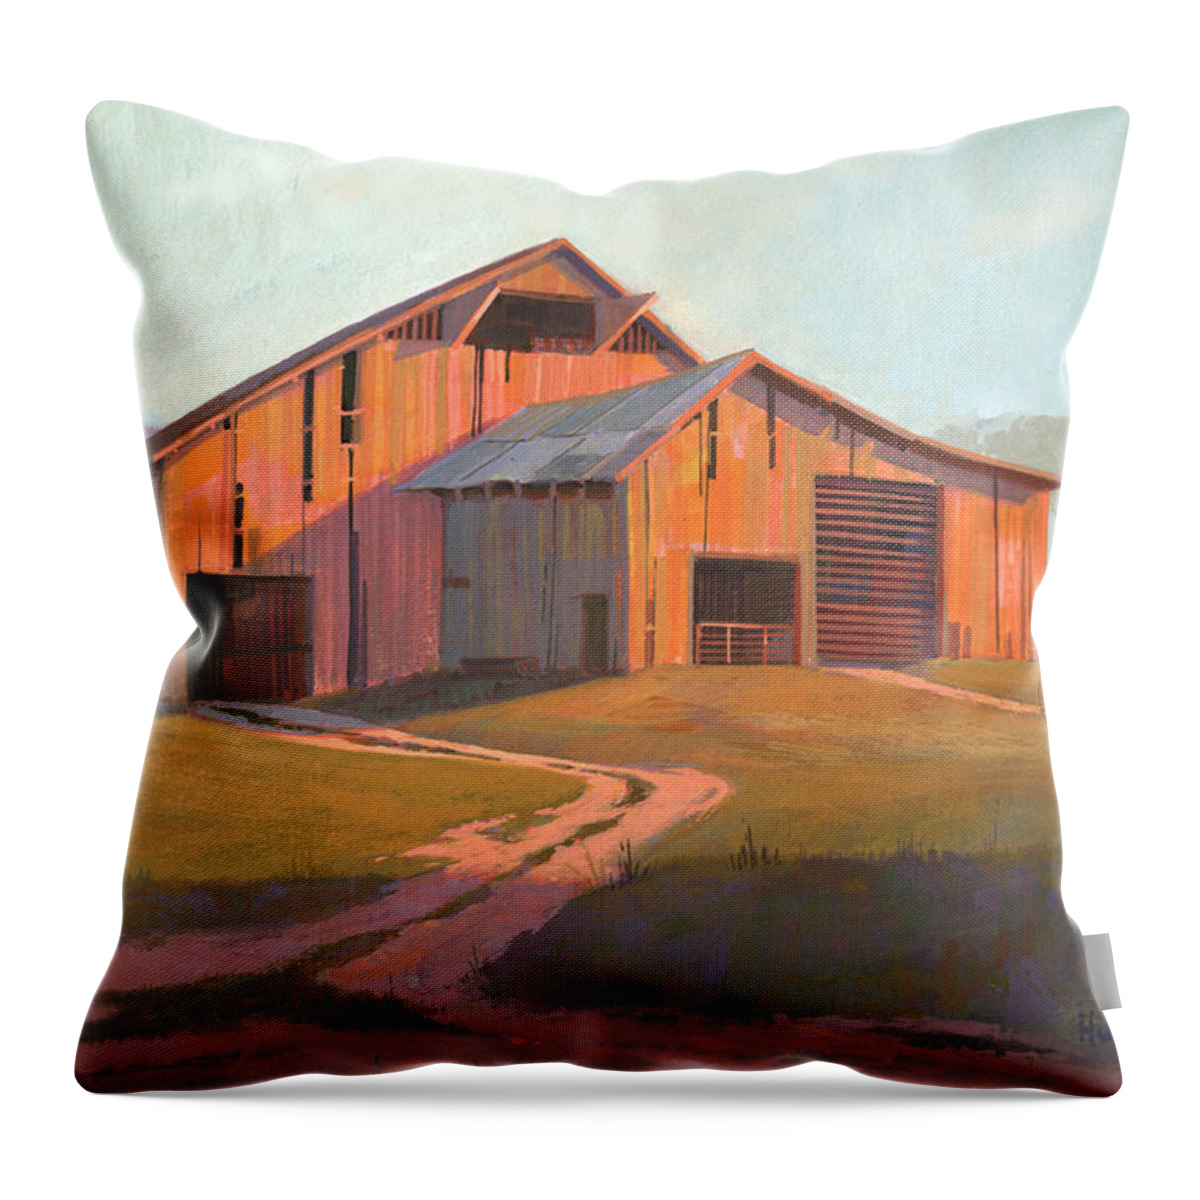 Michael Humphries Throw Pillow featuring the painting Sunset Barn by Michael Humphries